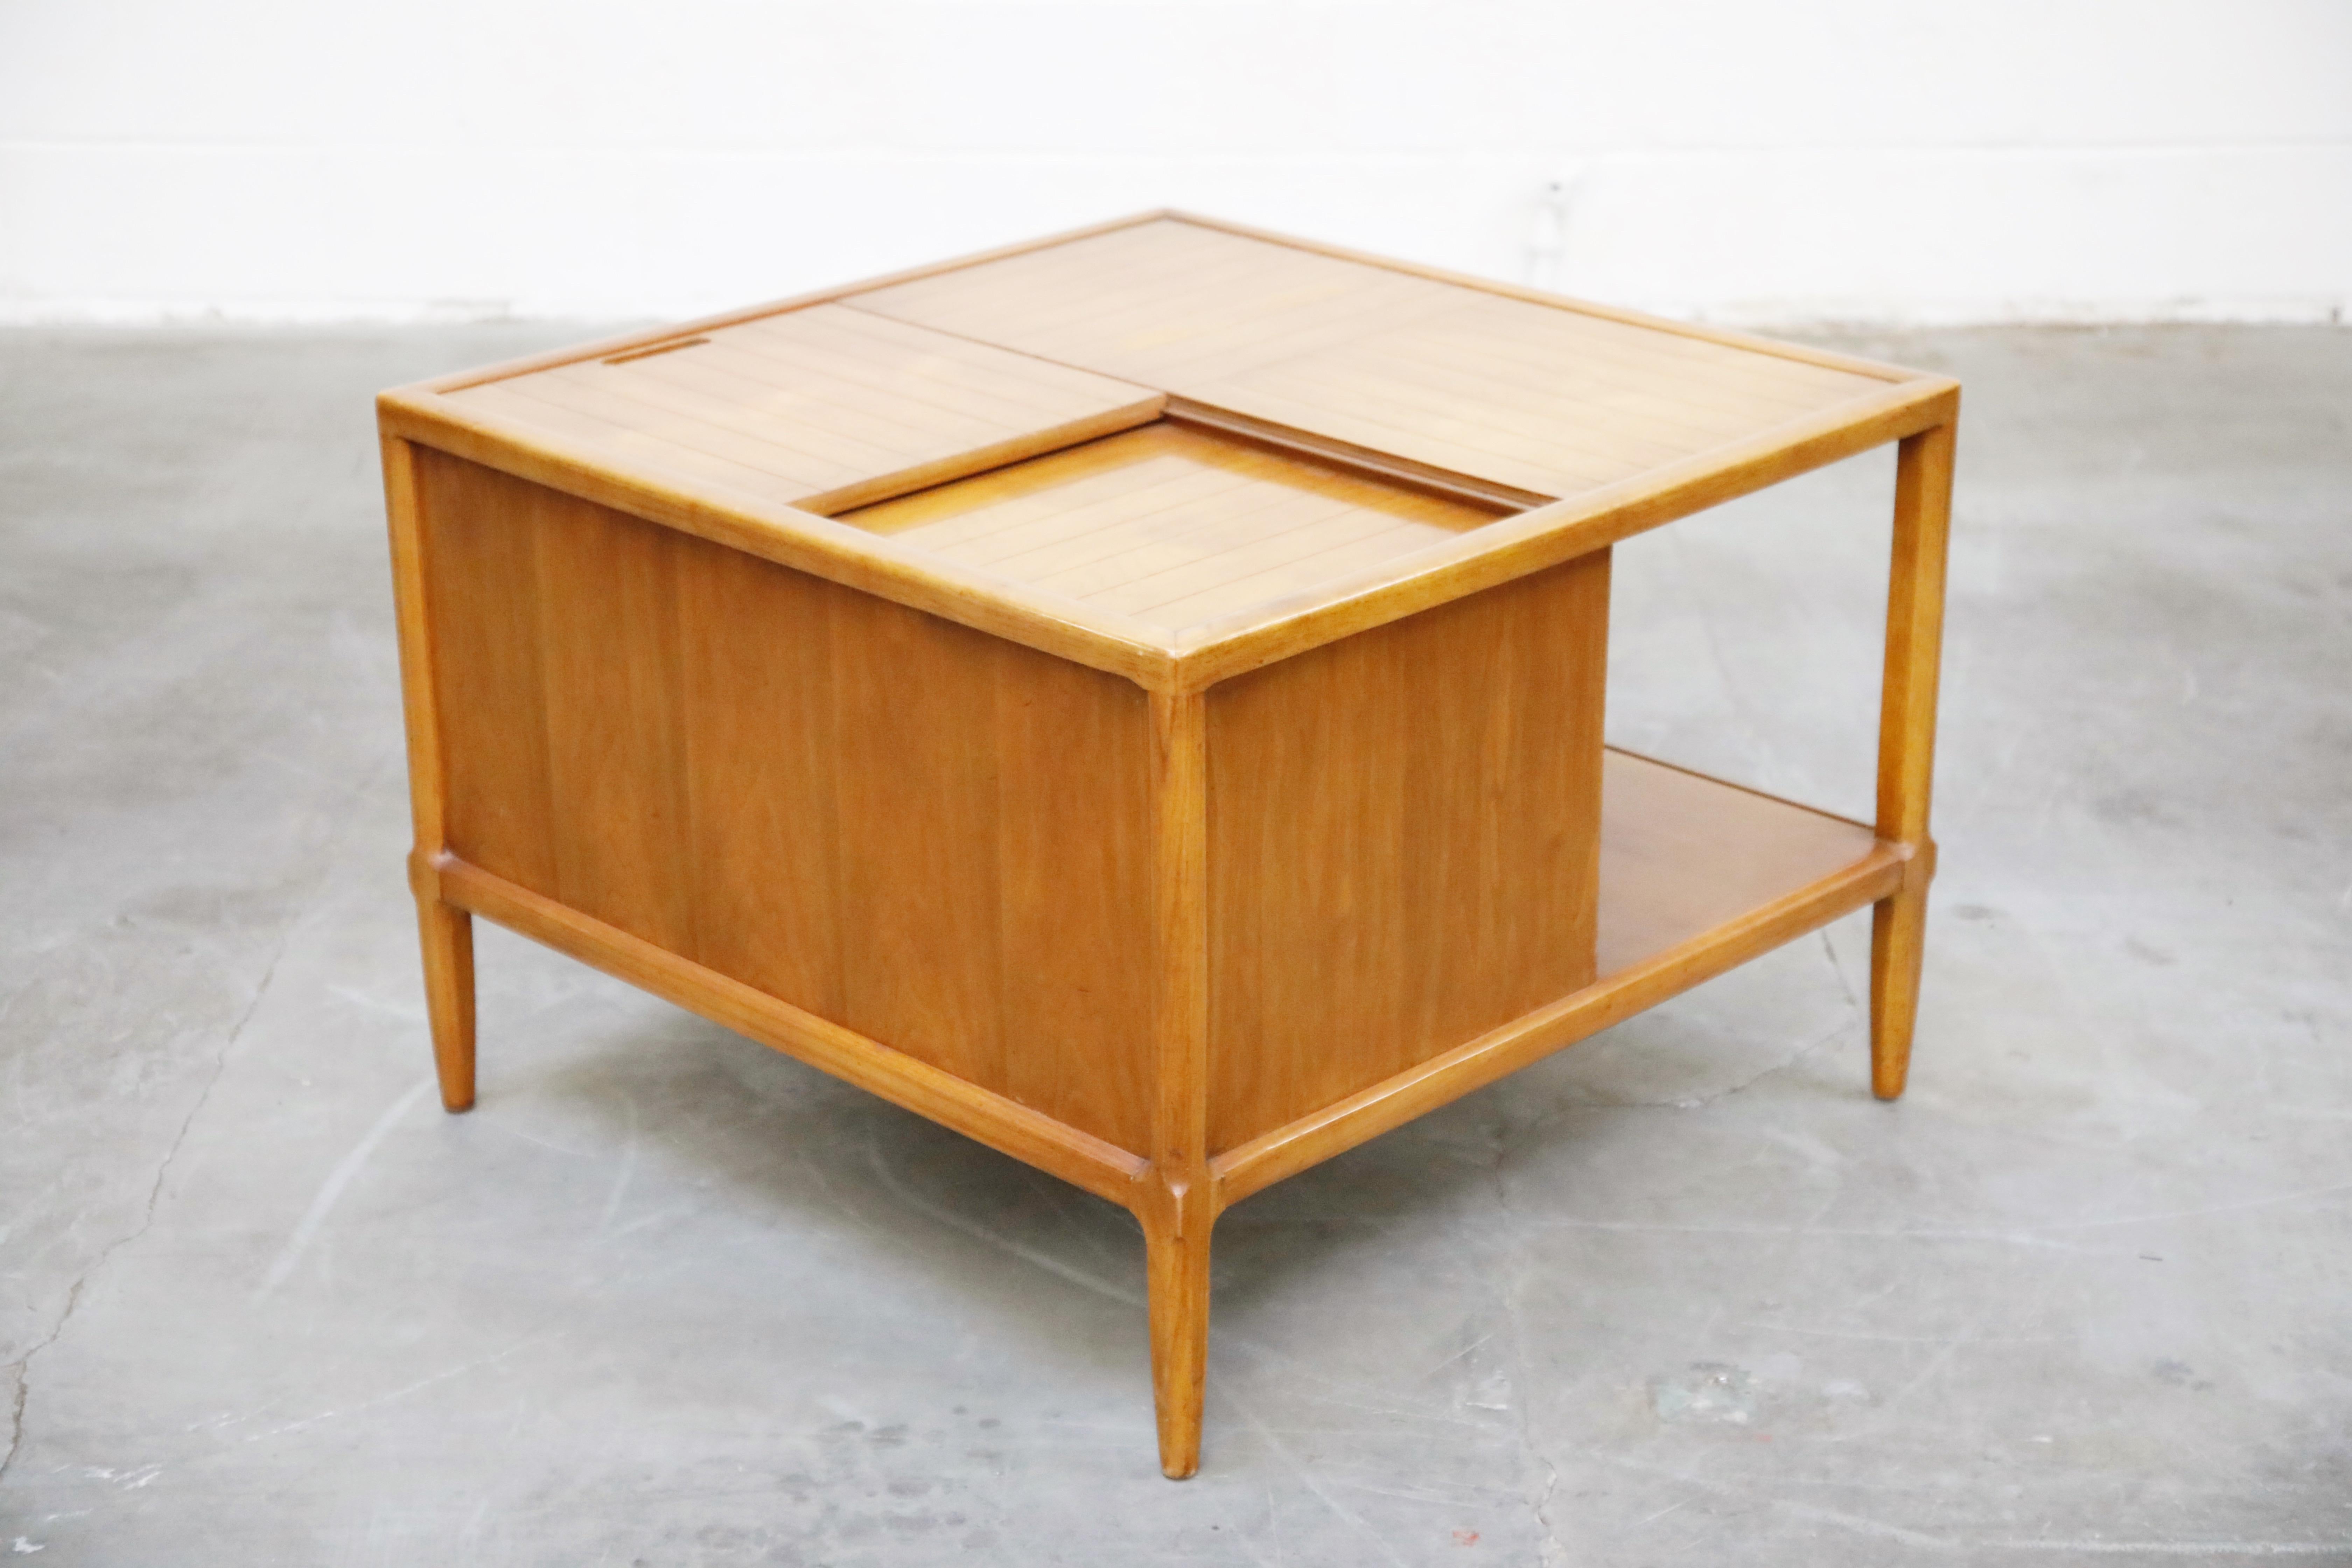 Wood Tomlinson Sophisticate Cocktail Bar and Storage Coffee Table, 1950s, Signed